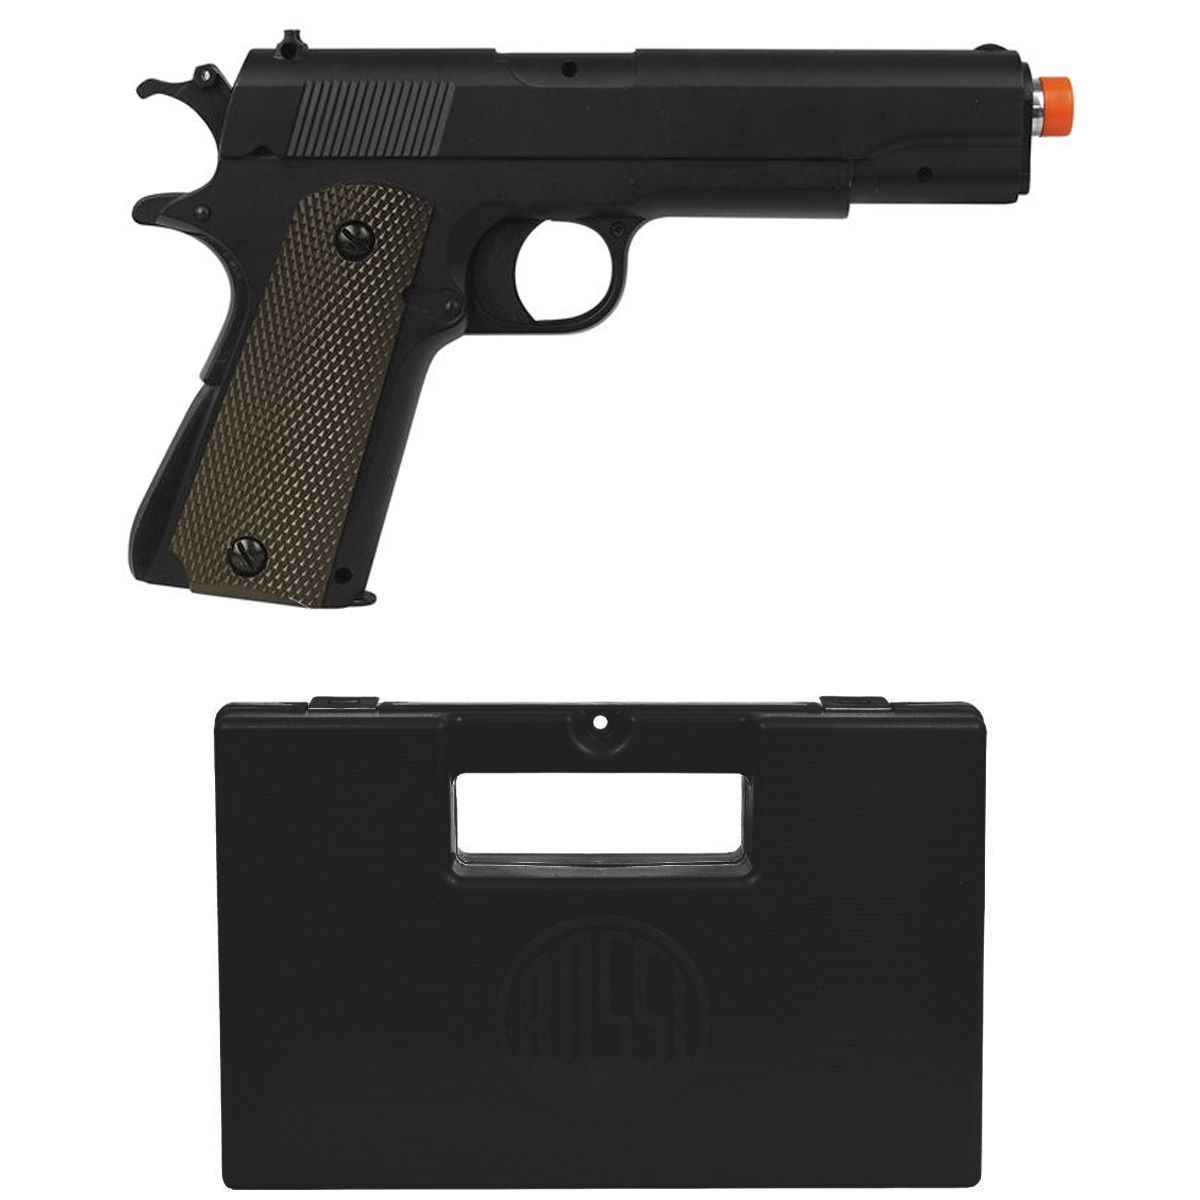 Pistola Airsoft Spring Double Bell Colt 1911 601 + Maleta Rossi
